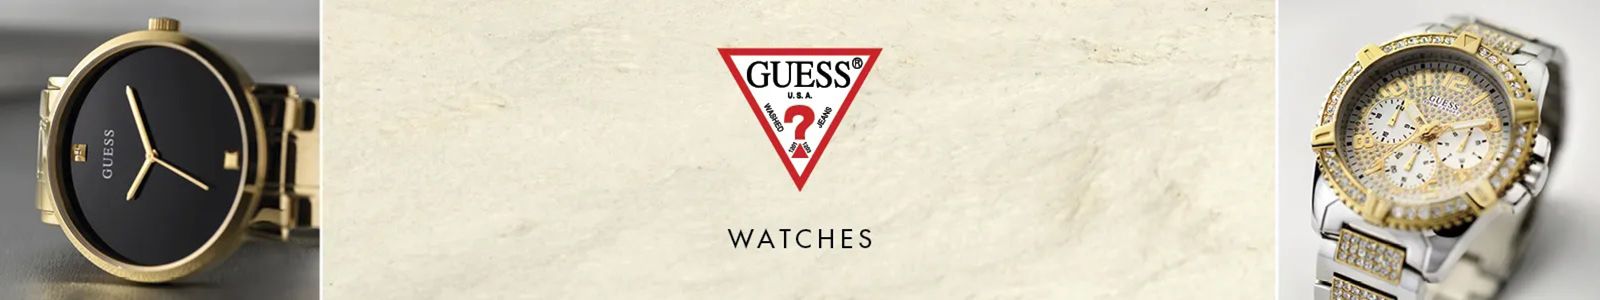 Guess, Watches